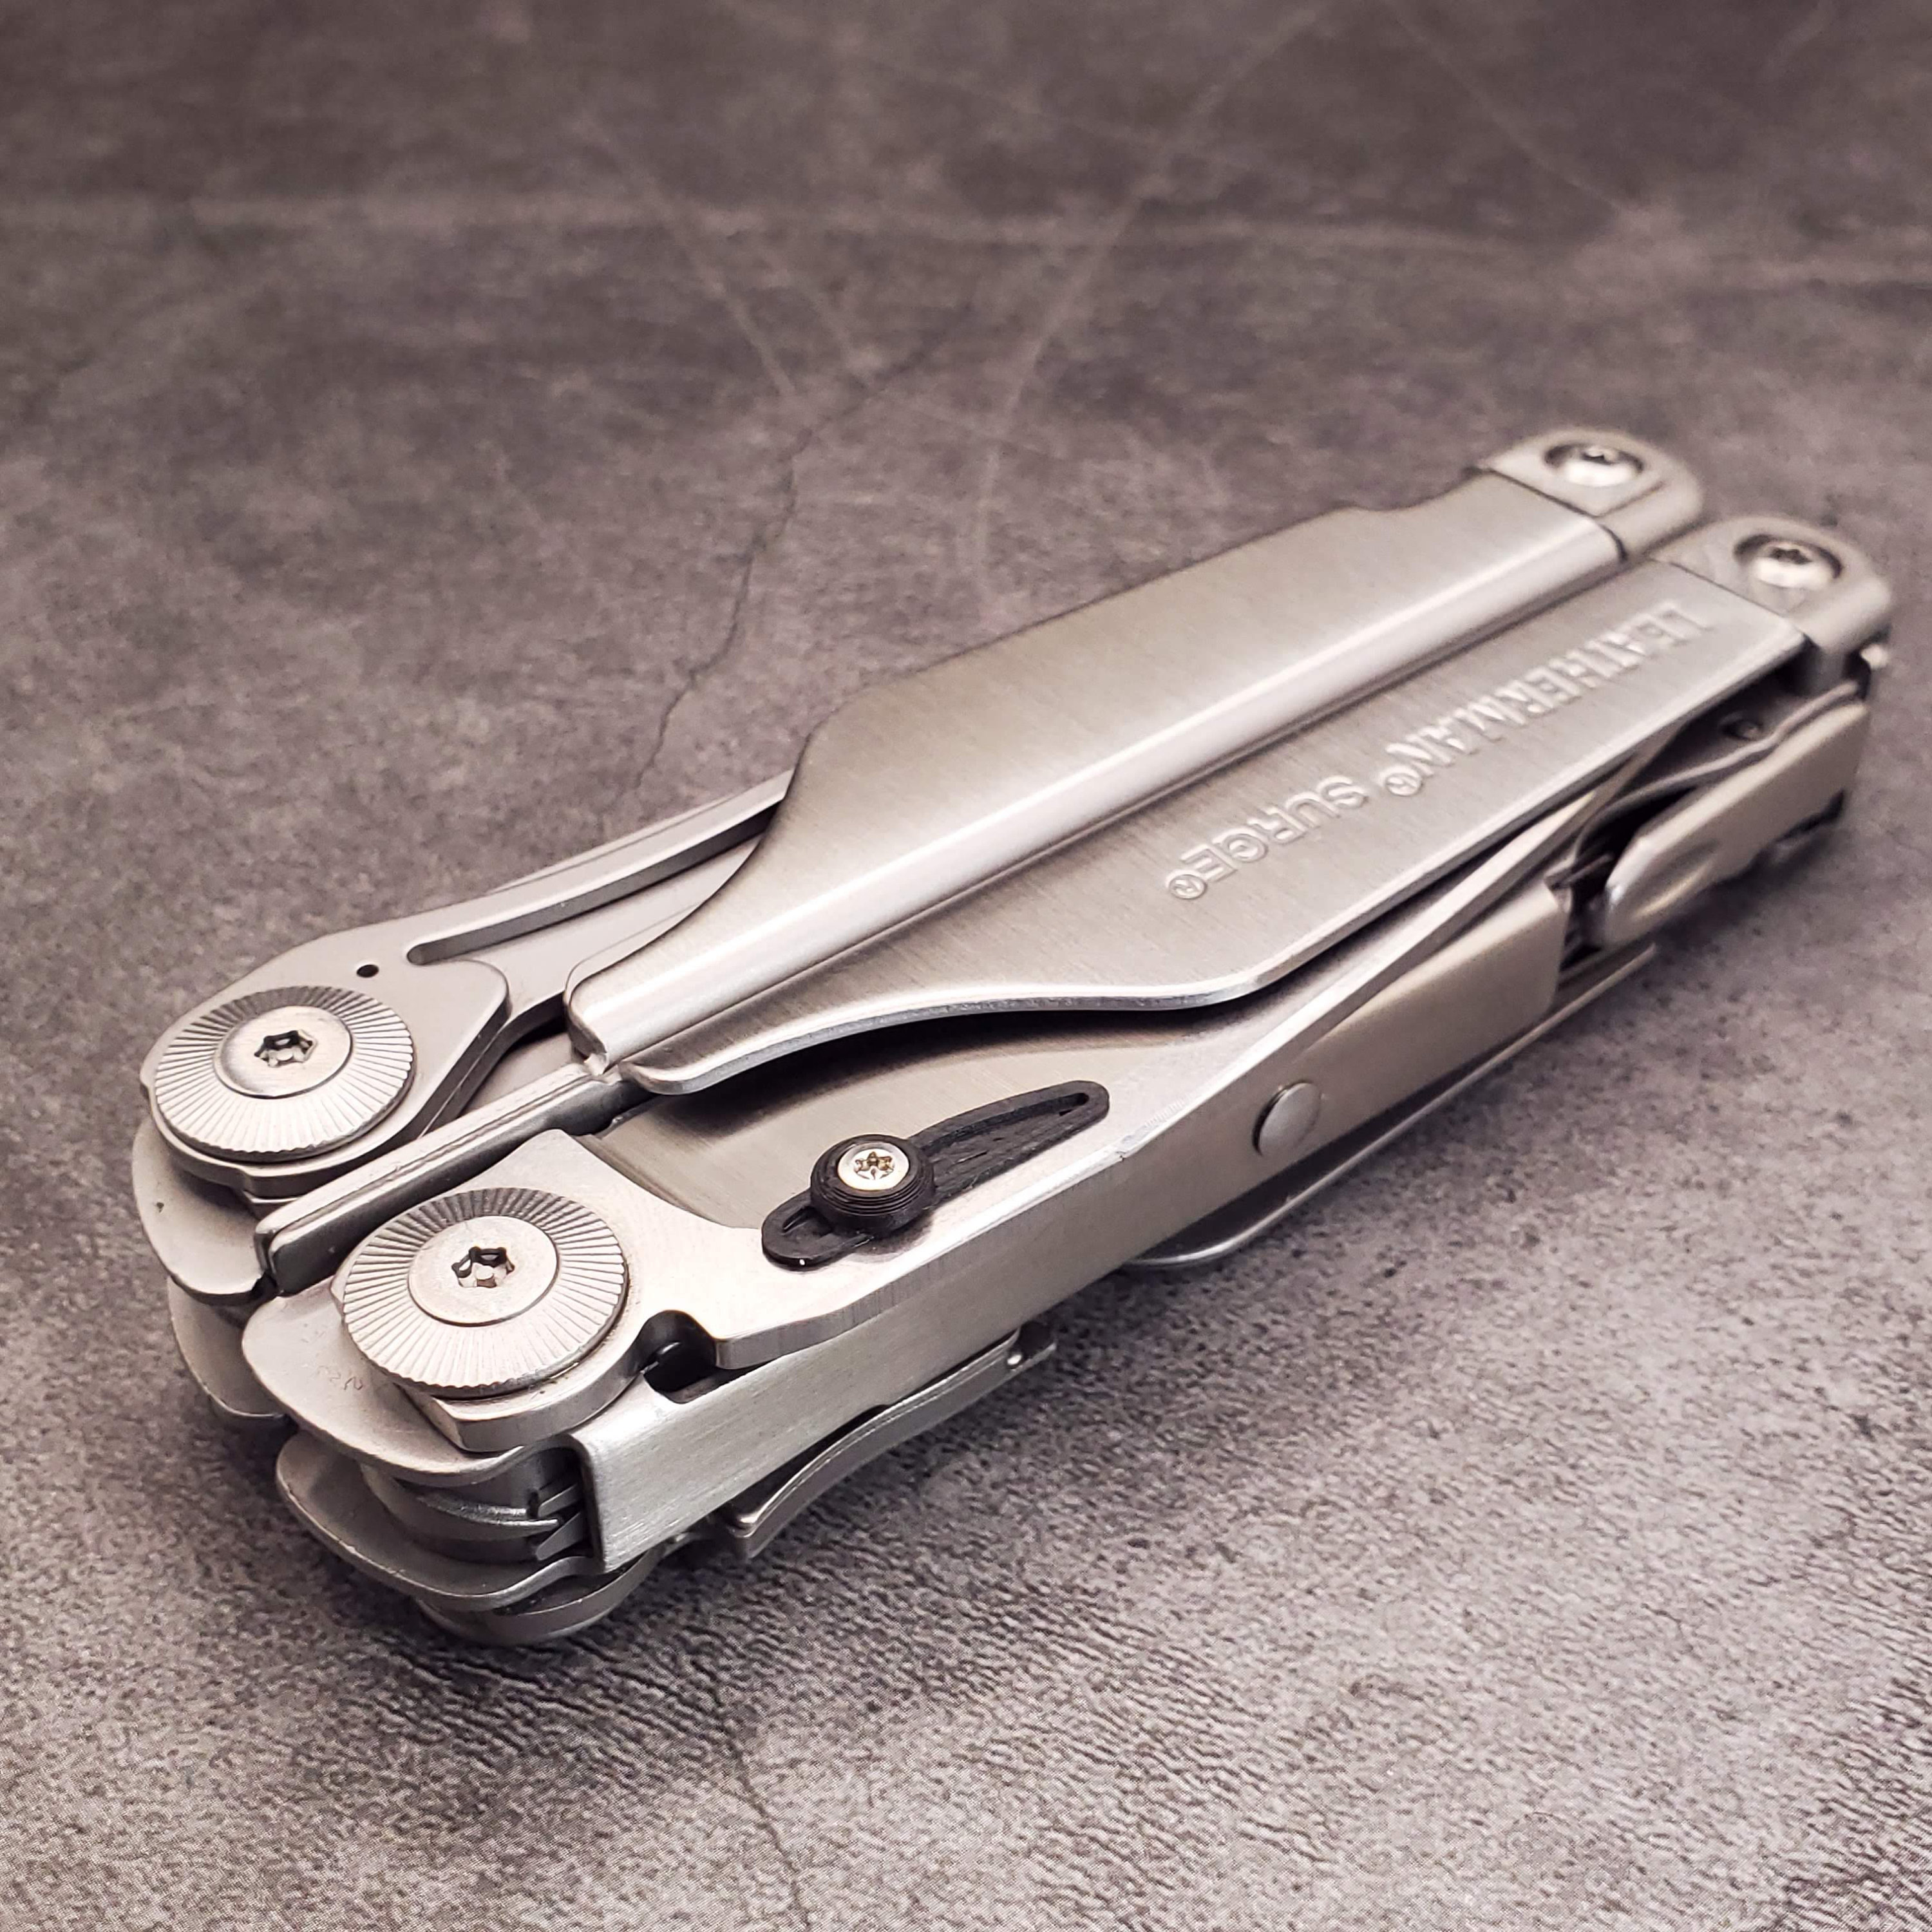 Leatherman Parts Mod Replacement for Surge multi-tool genuine